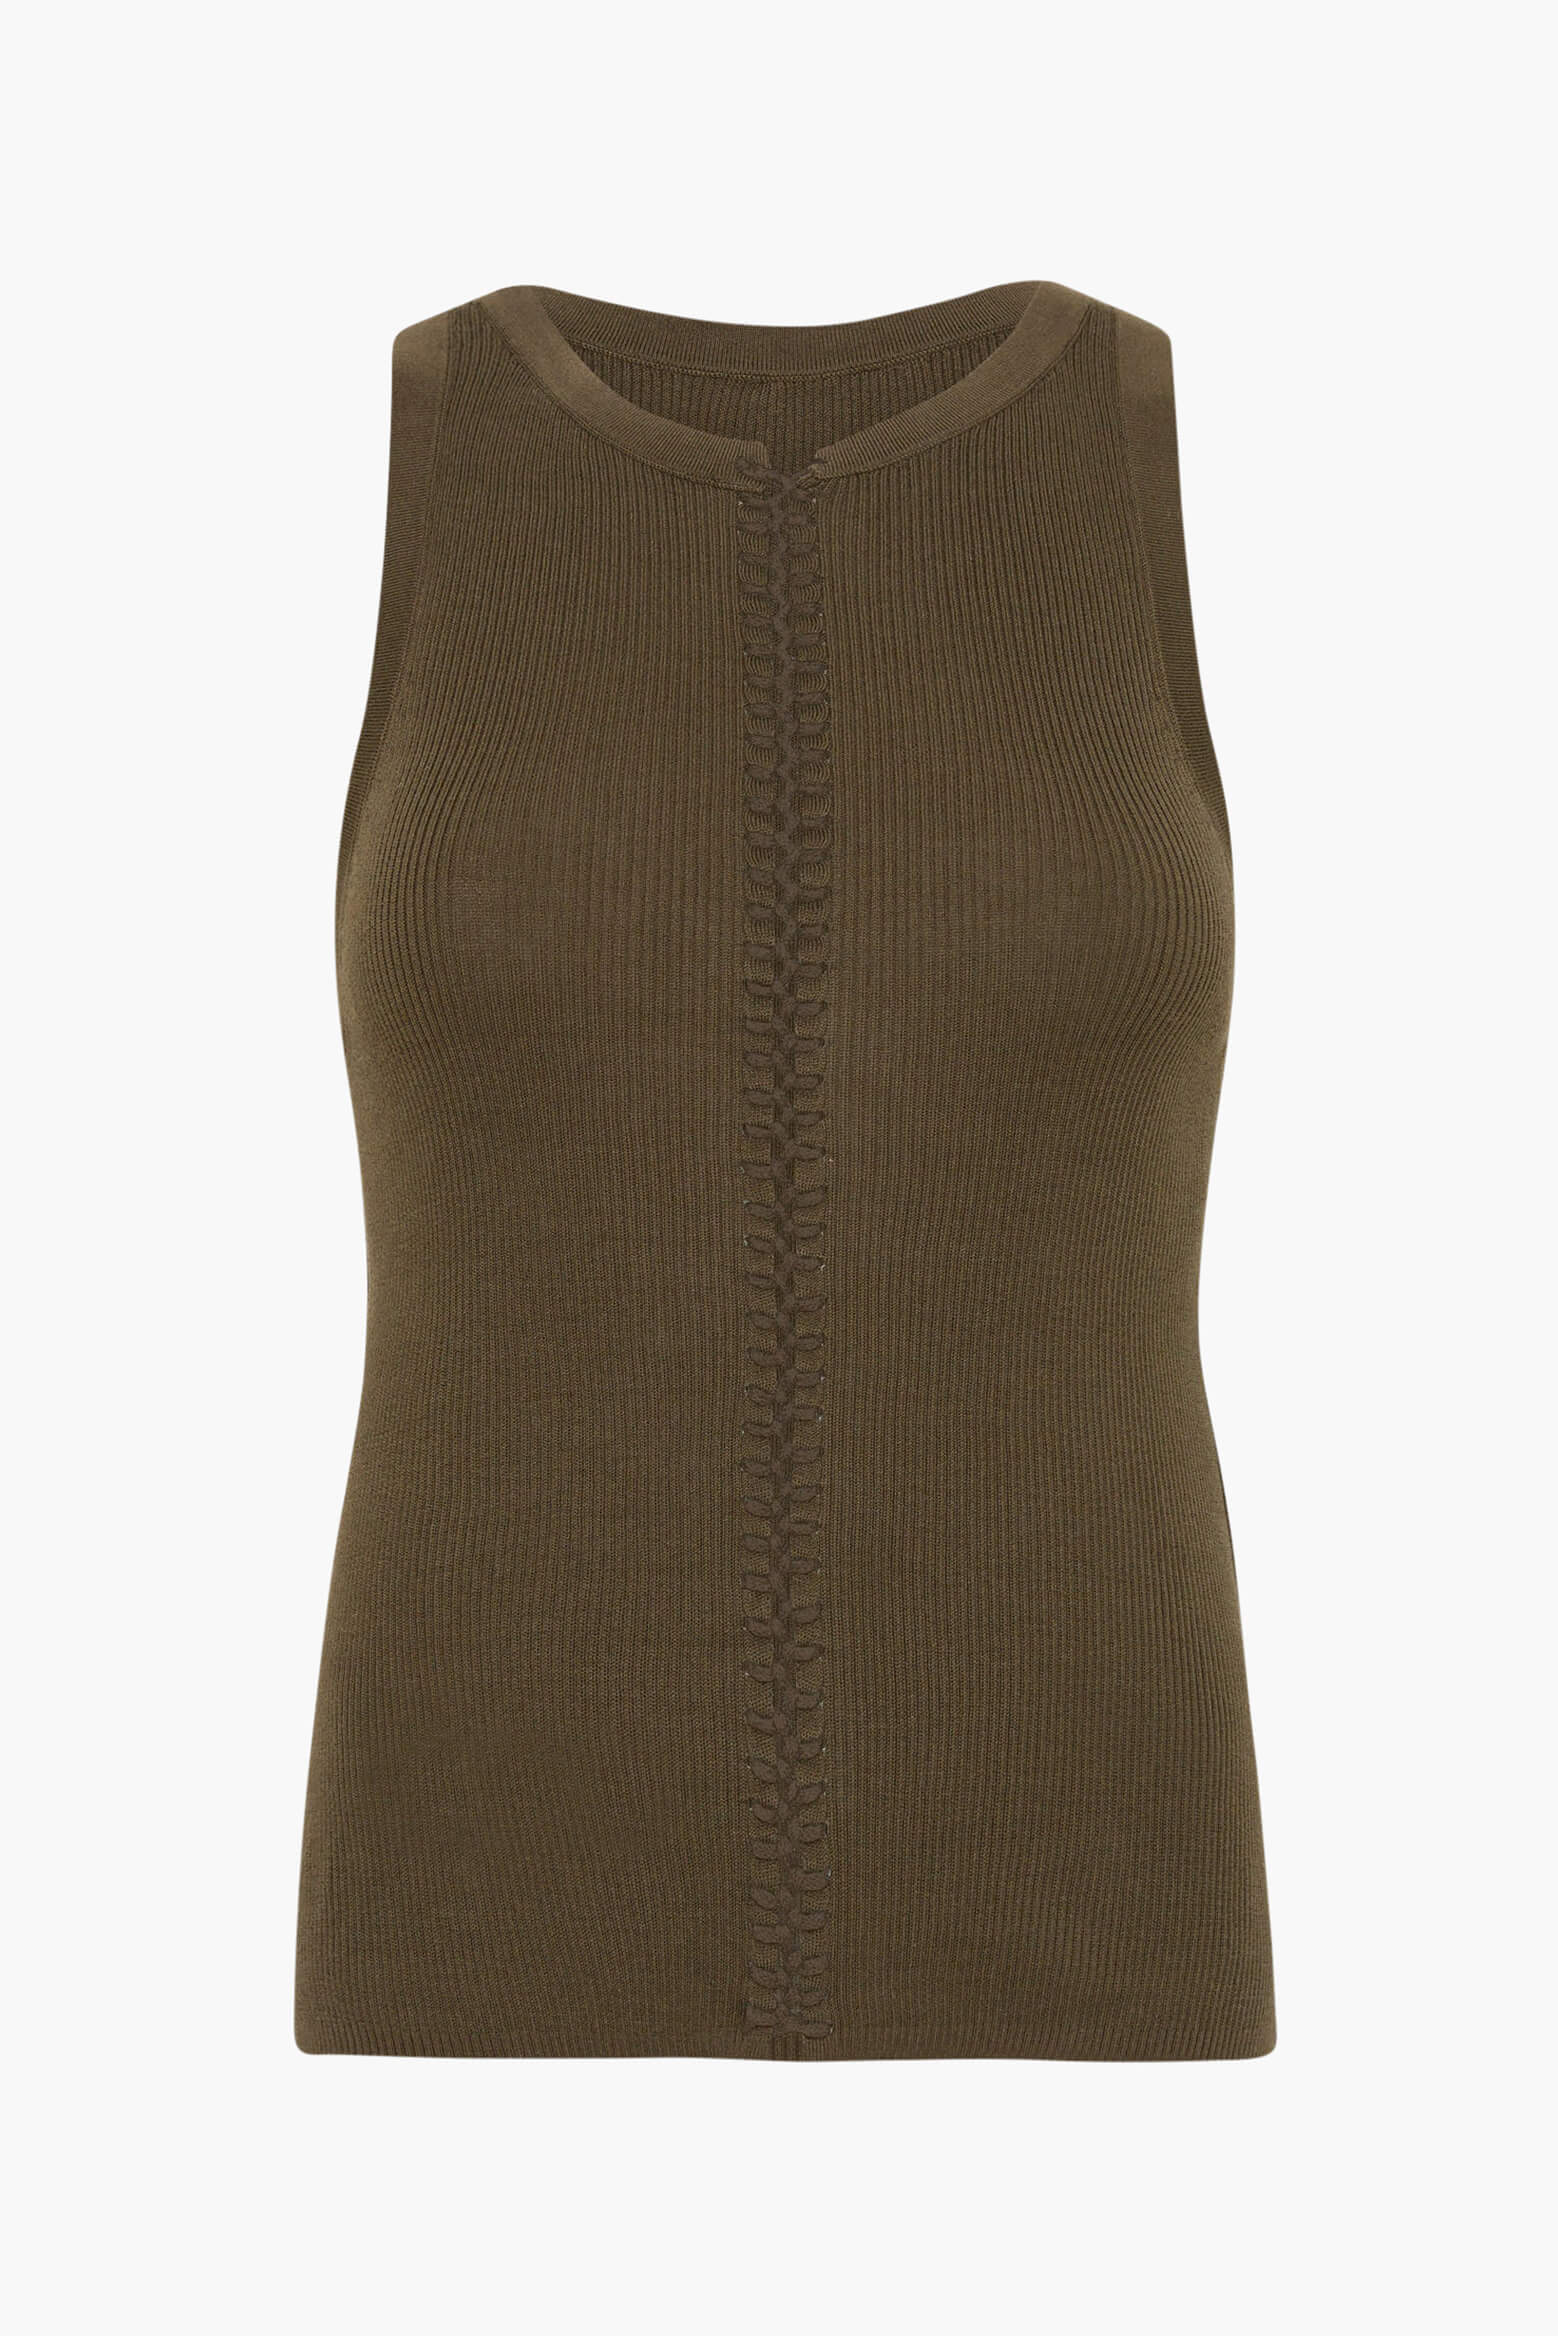 The St Agni Stitch Detail Tank in Kelp available at The New Trend Australia